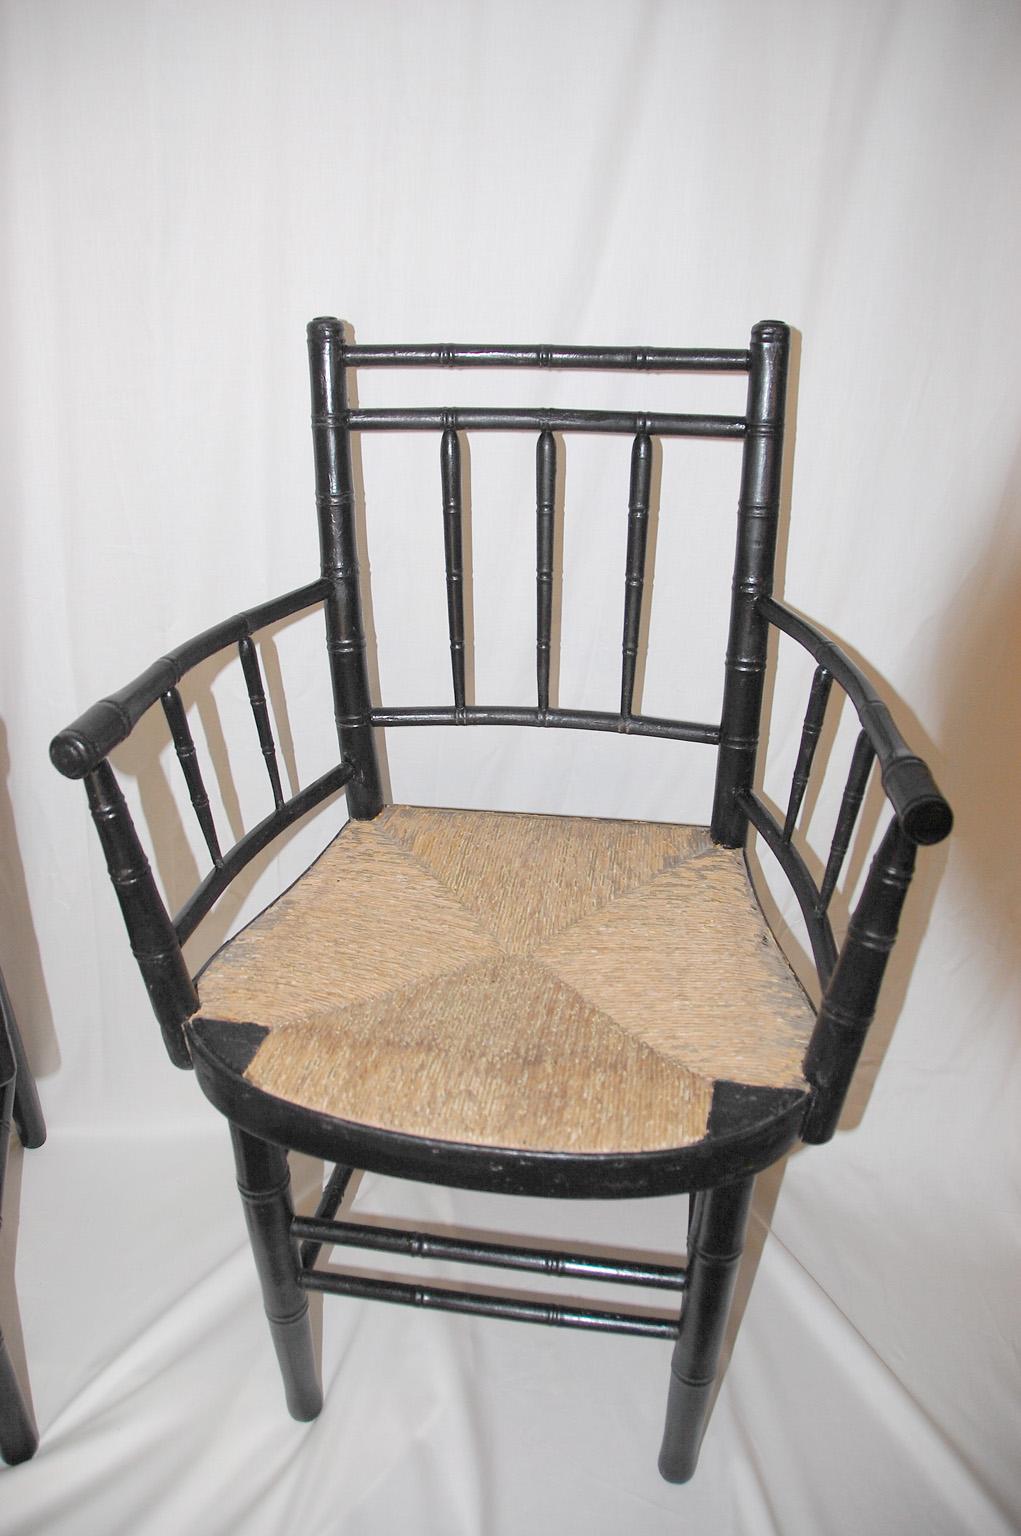 American Sheraton period pair of painted armchairs. These quintessential American chairs have original ballooned rush seats, bamboo turnings, double box stretchers, turned and bowed arms. The chairs have been recently repainted. Circa 1810.